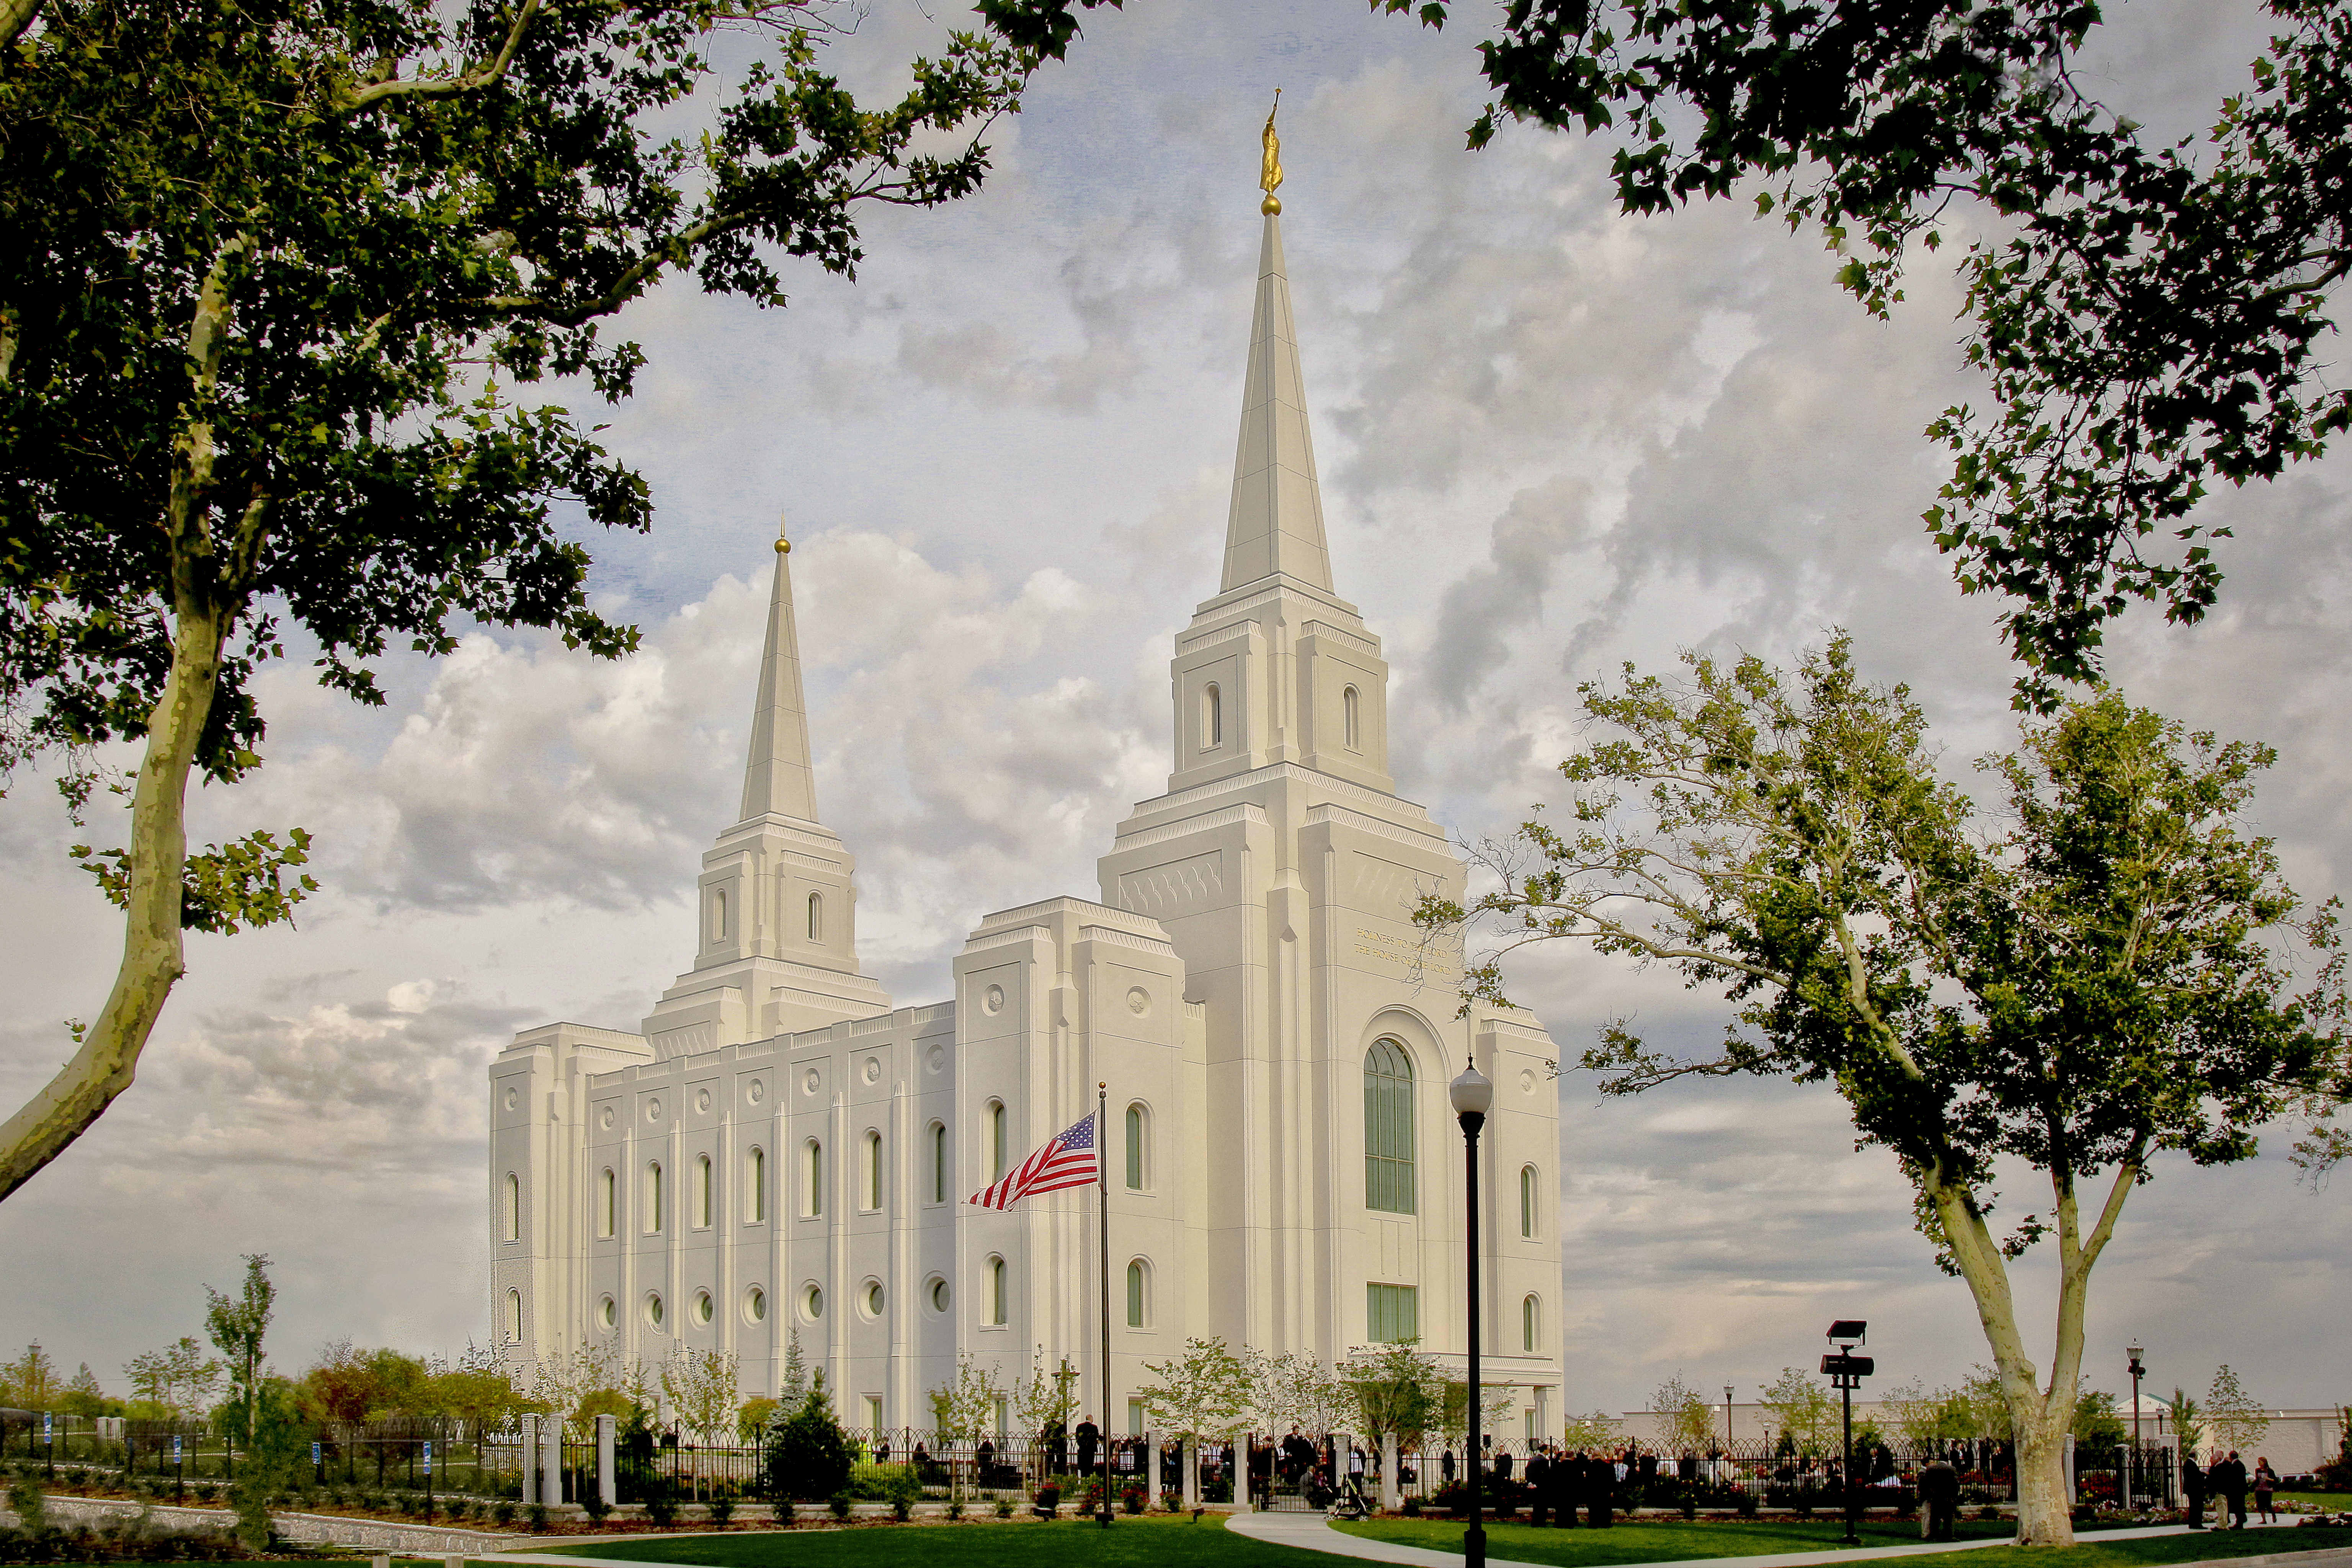 The Brigham City Utah Temple and grounds in the daytime, with green trees and an American flag in the foreground.